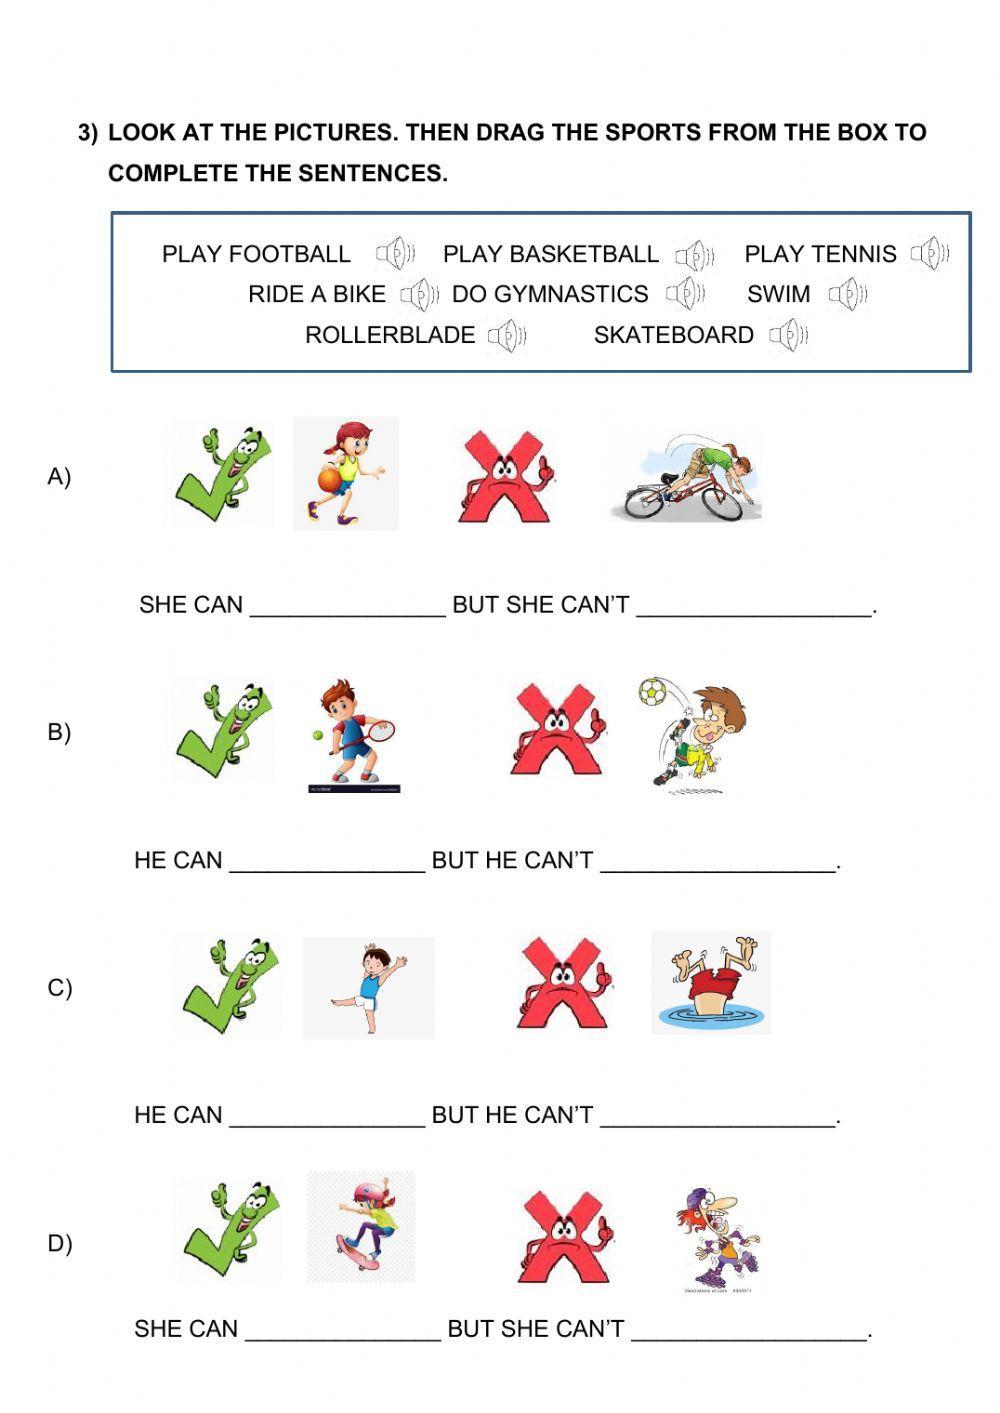 Can you play these sports?